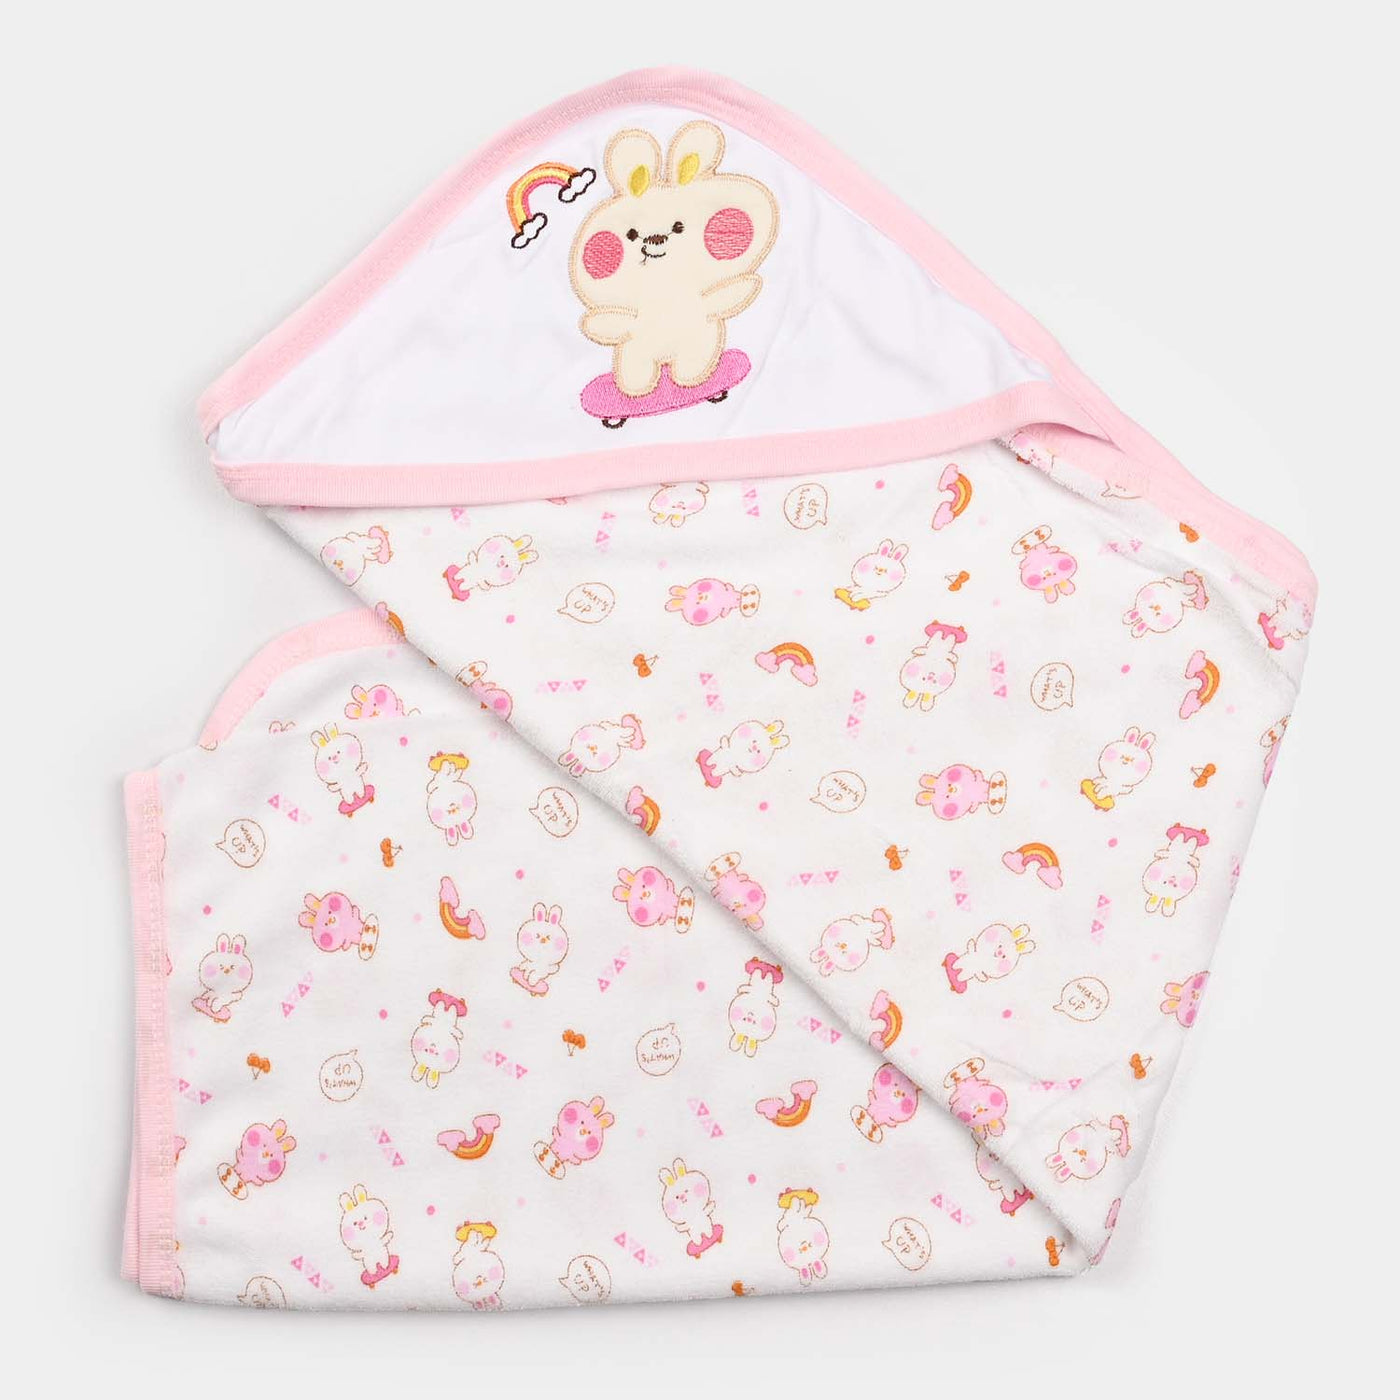 Baby Wrapping Sheet | 0M+